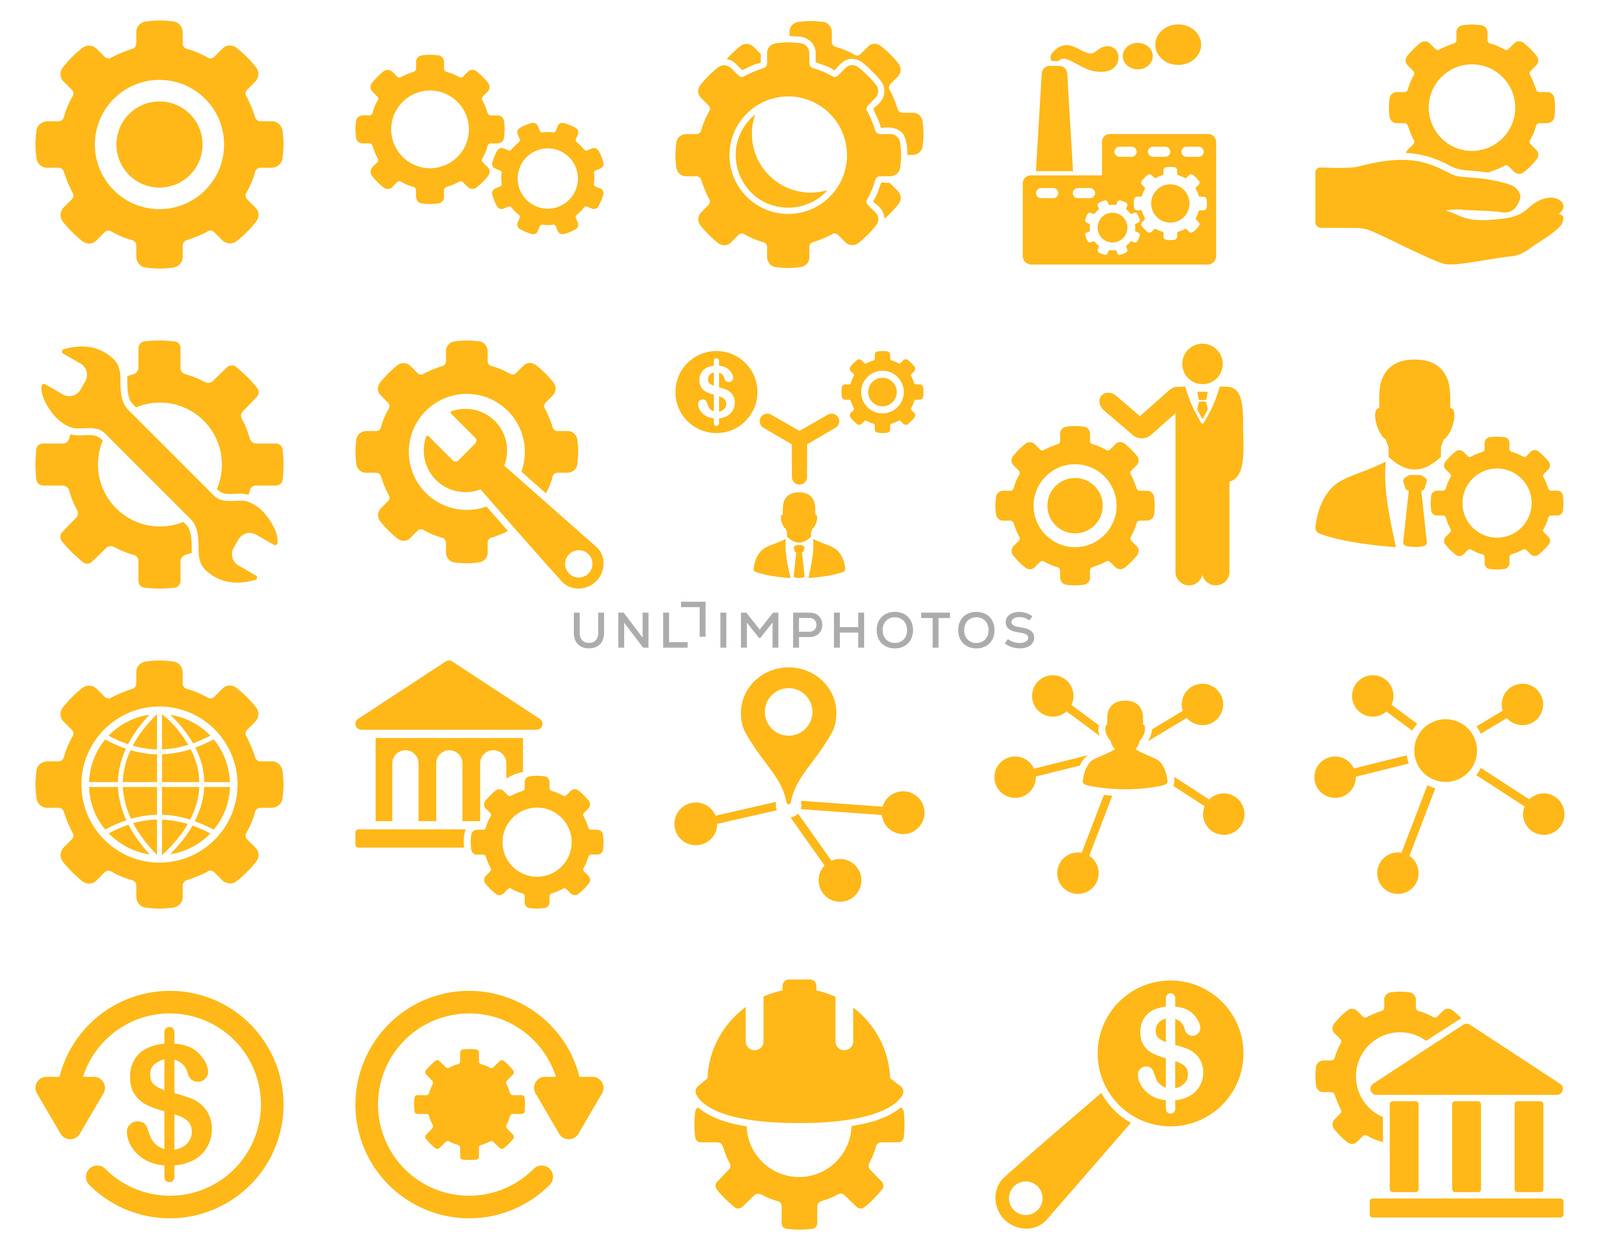 Settings and Tools Icons. Glyph set style is flat images, yellow color, isolated on a white background.